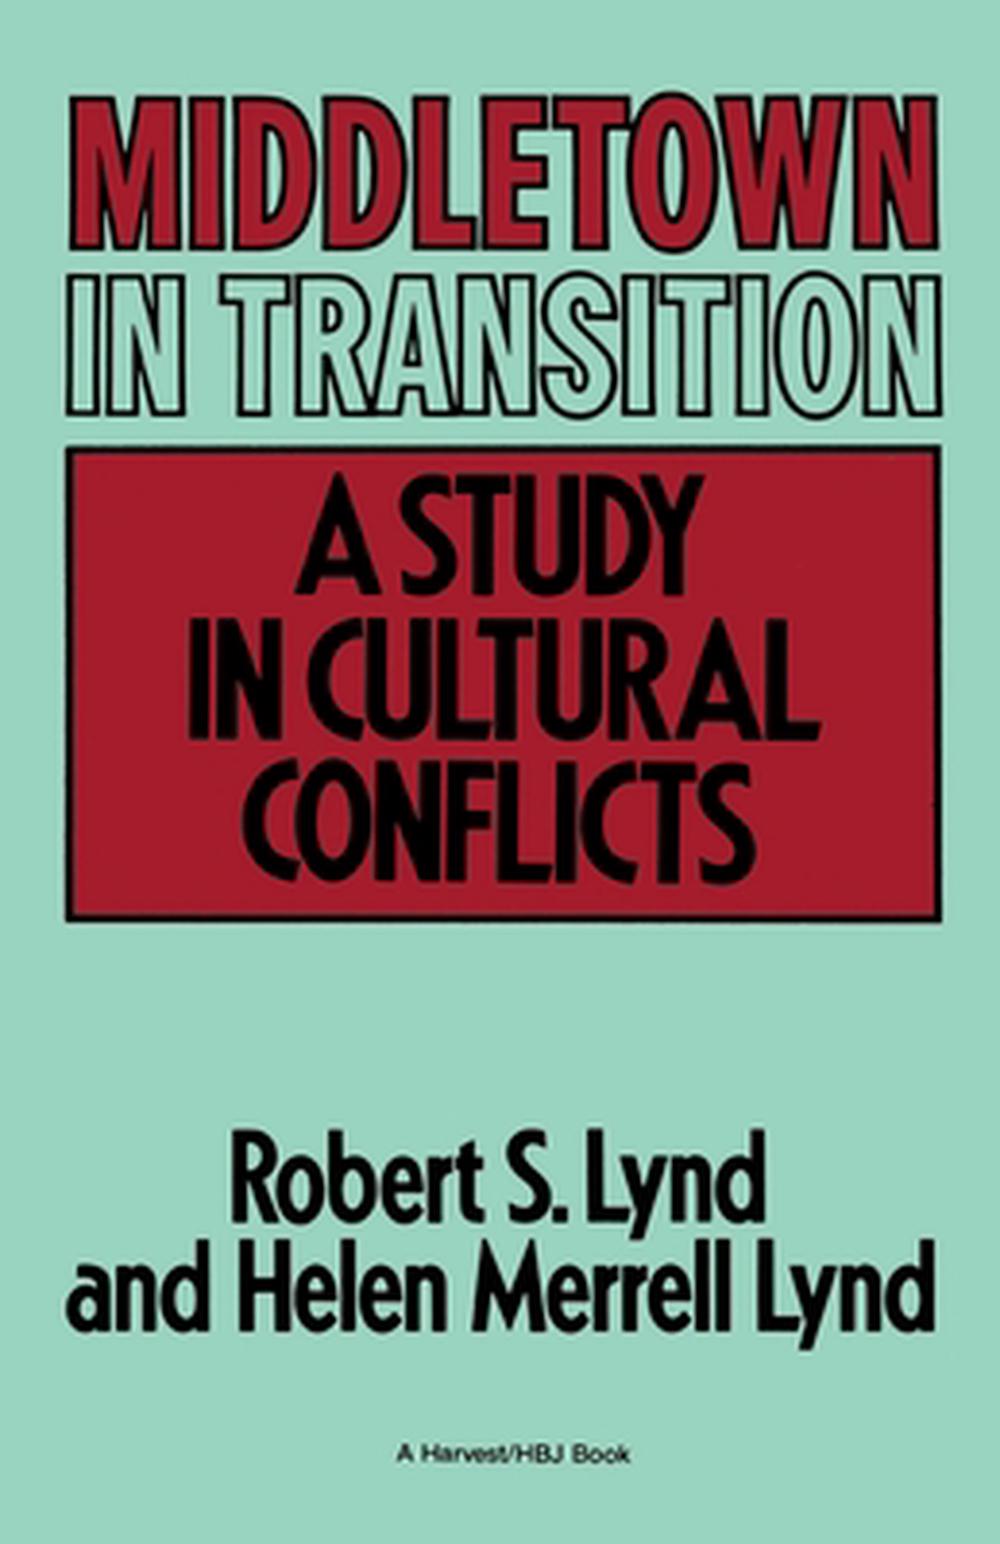 Middletown in Transition A Study in Cultural Conflicts by Robert